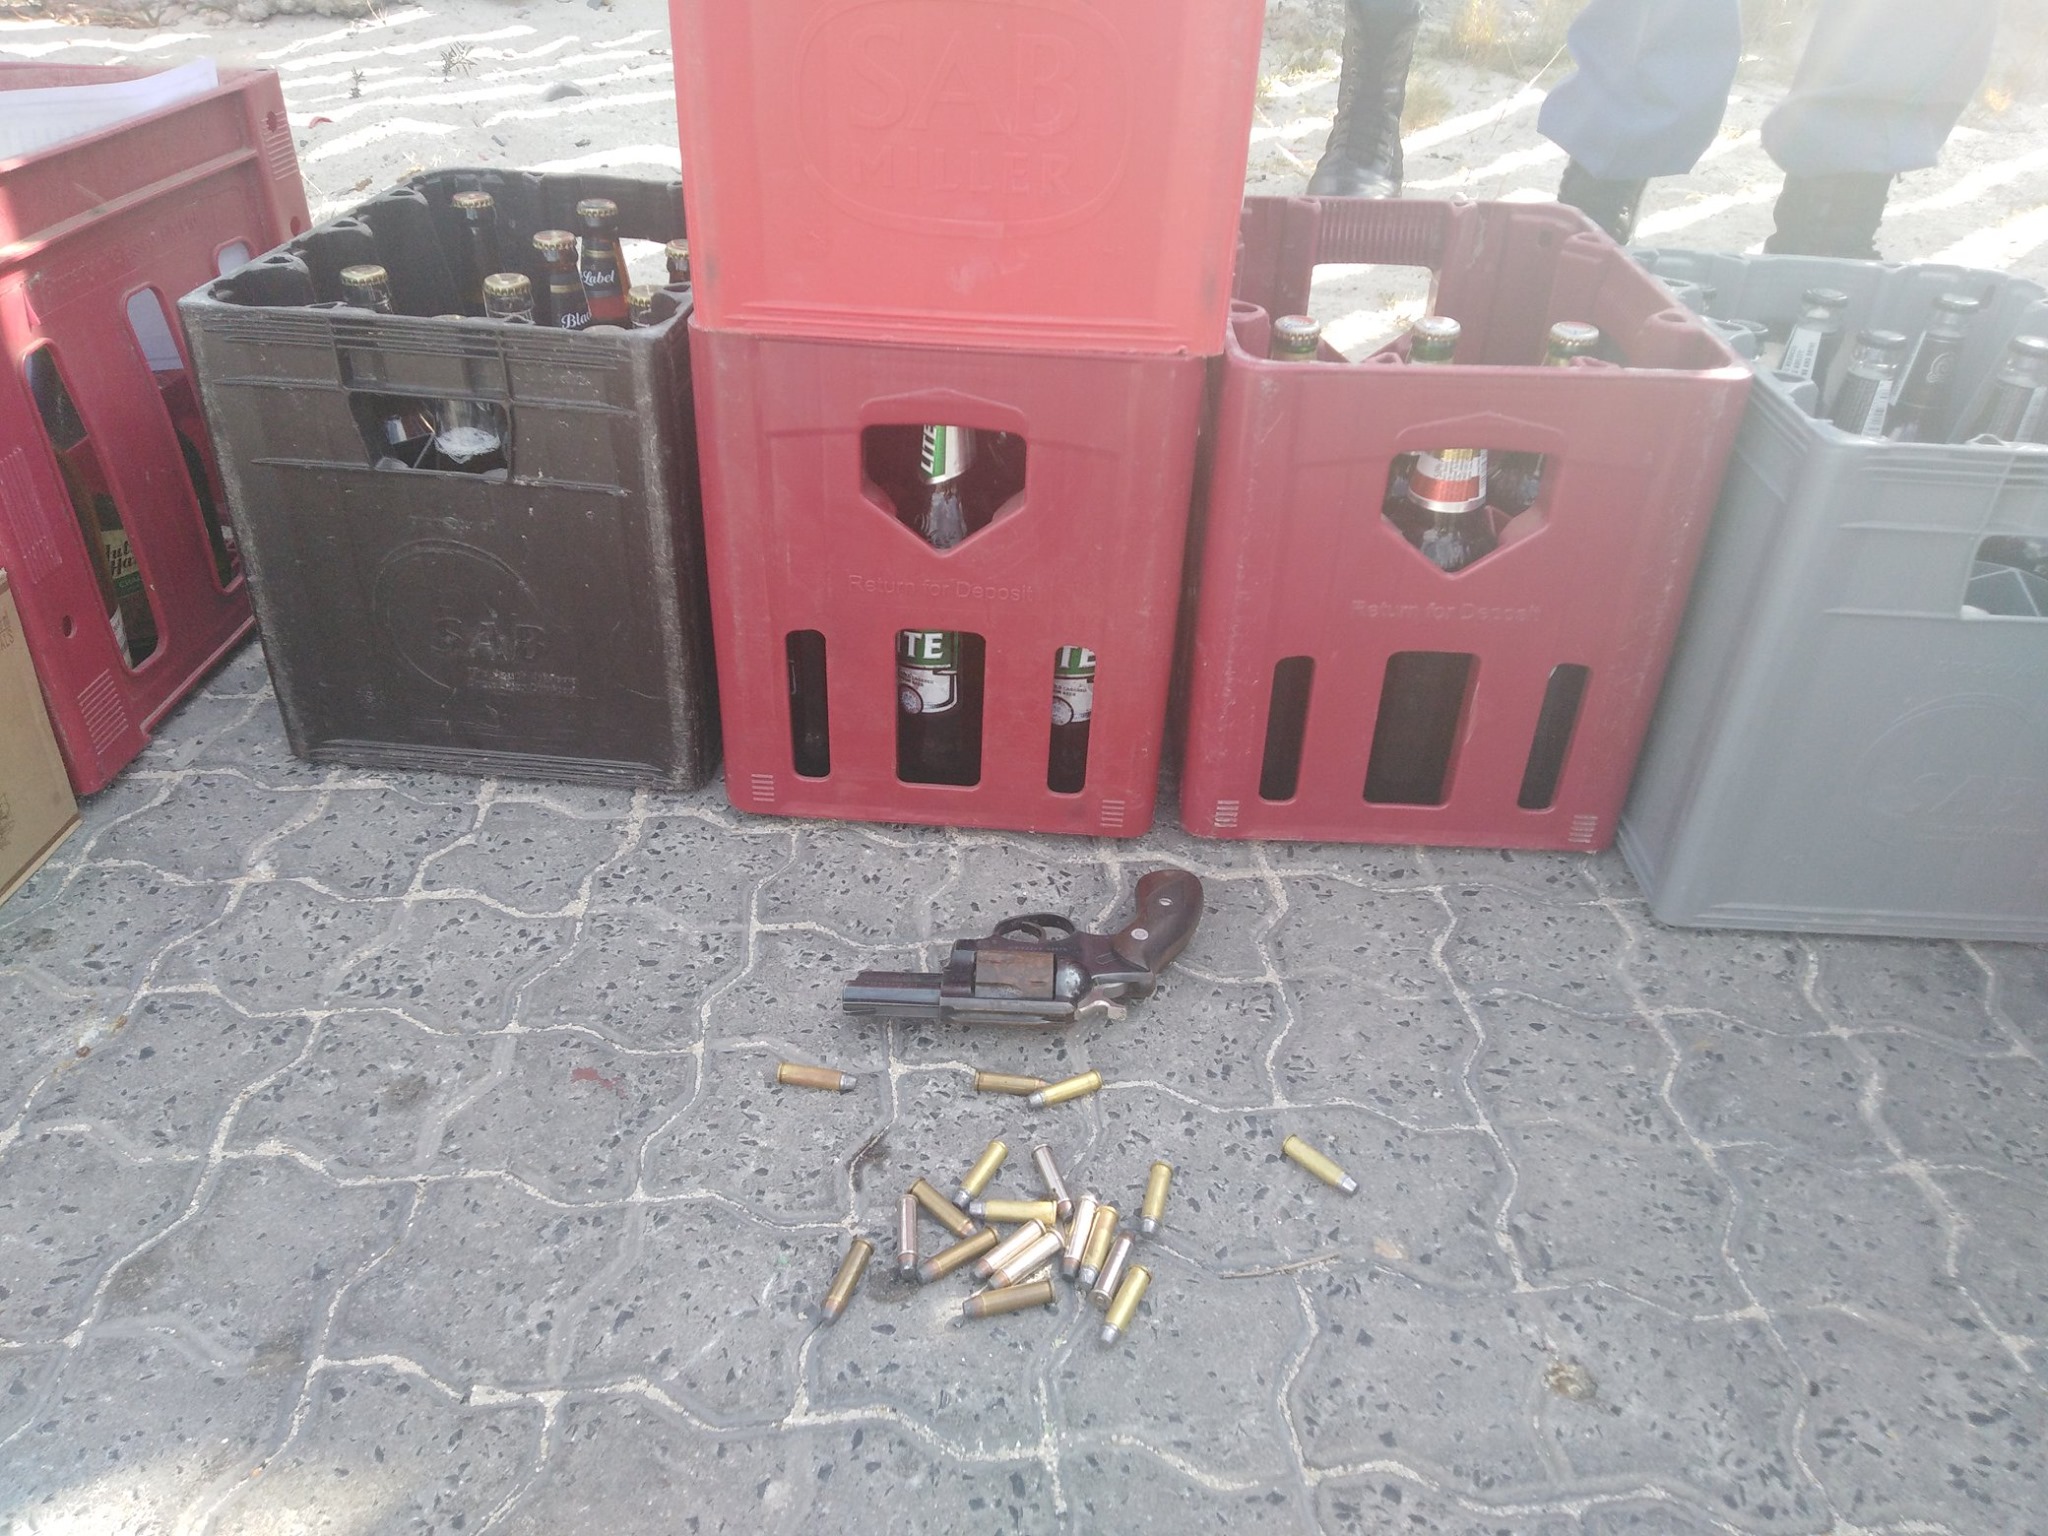 Four suspects apprehended during operations in Khayelitsha